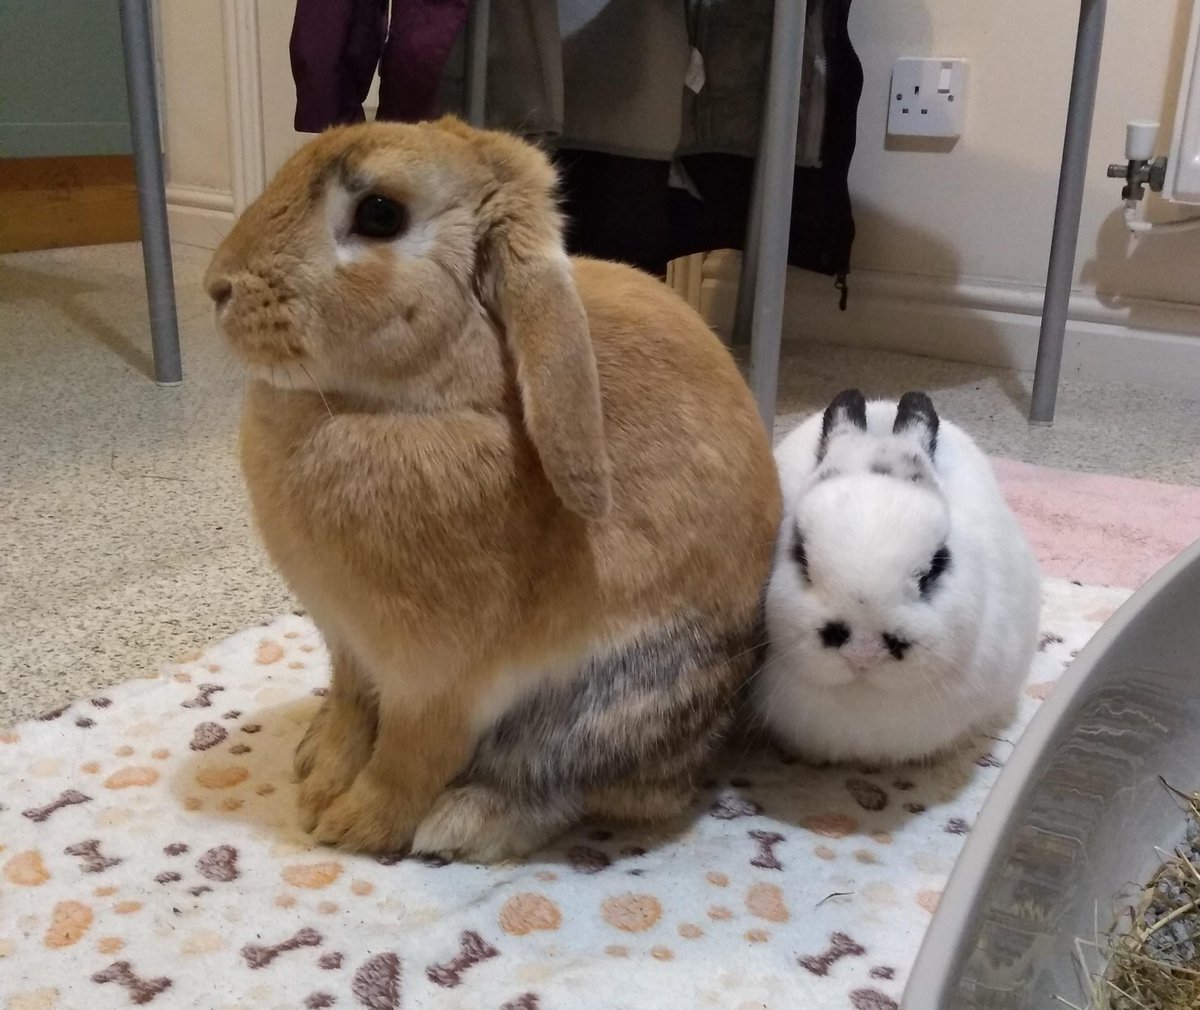 And finally the Regal BuN and the angry loaf